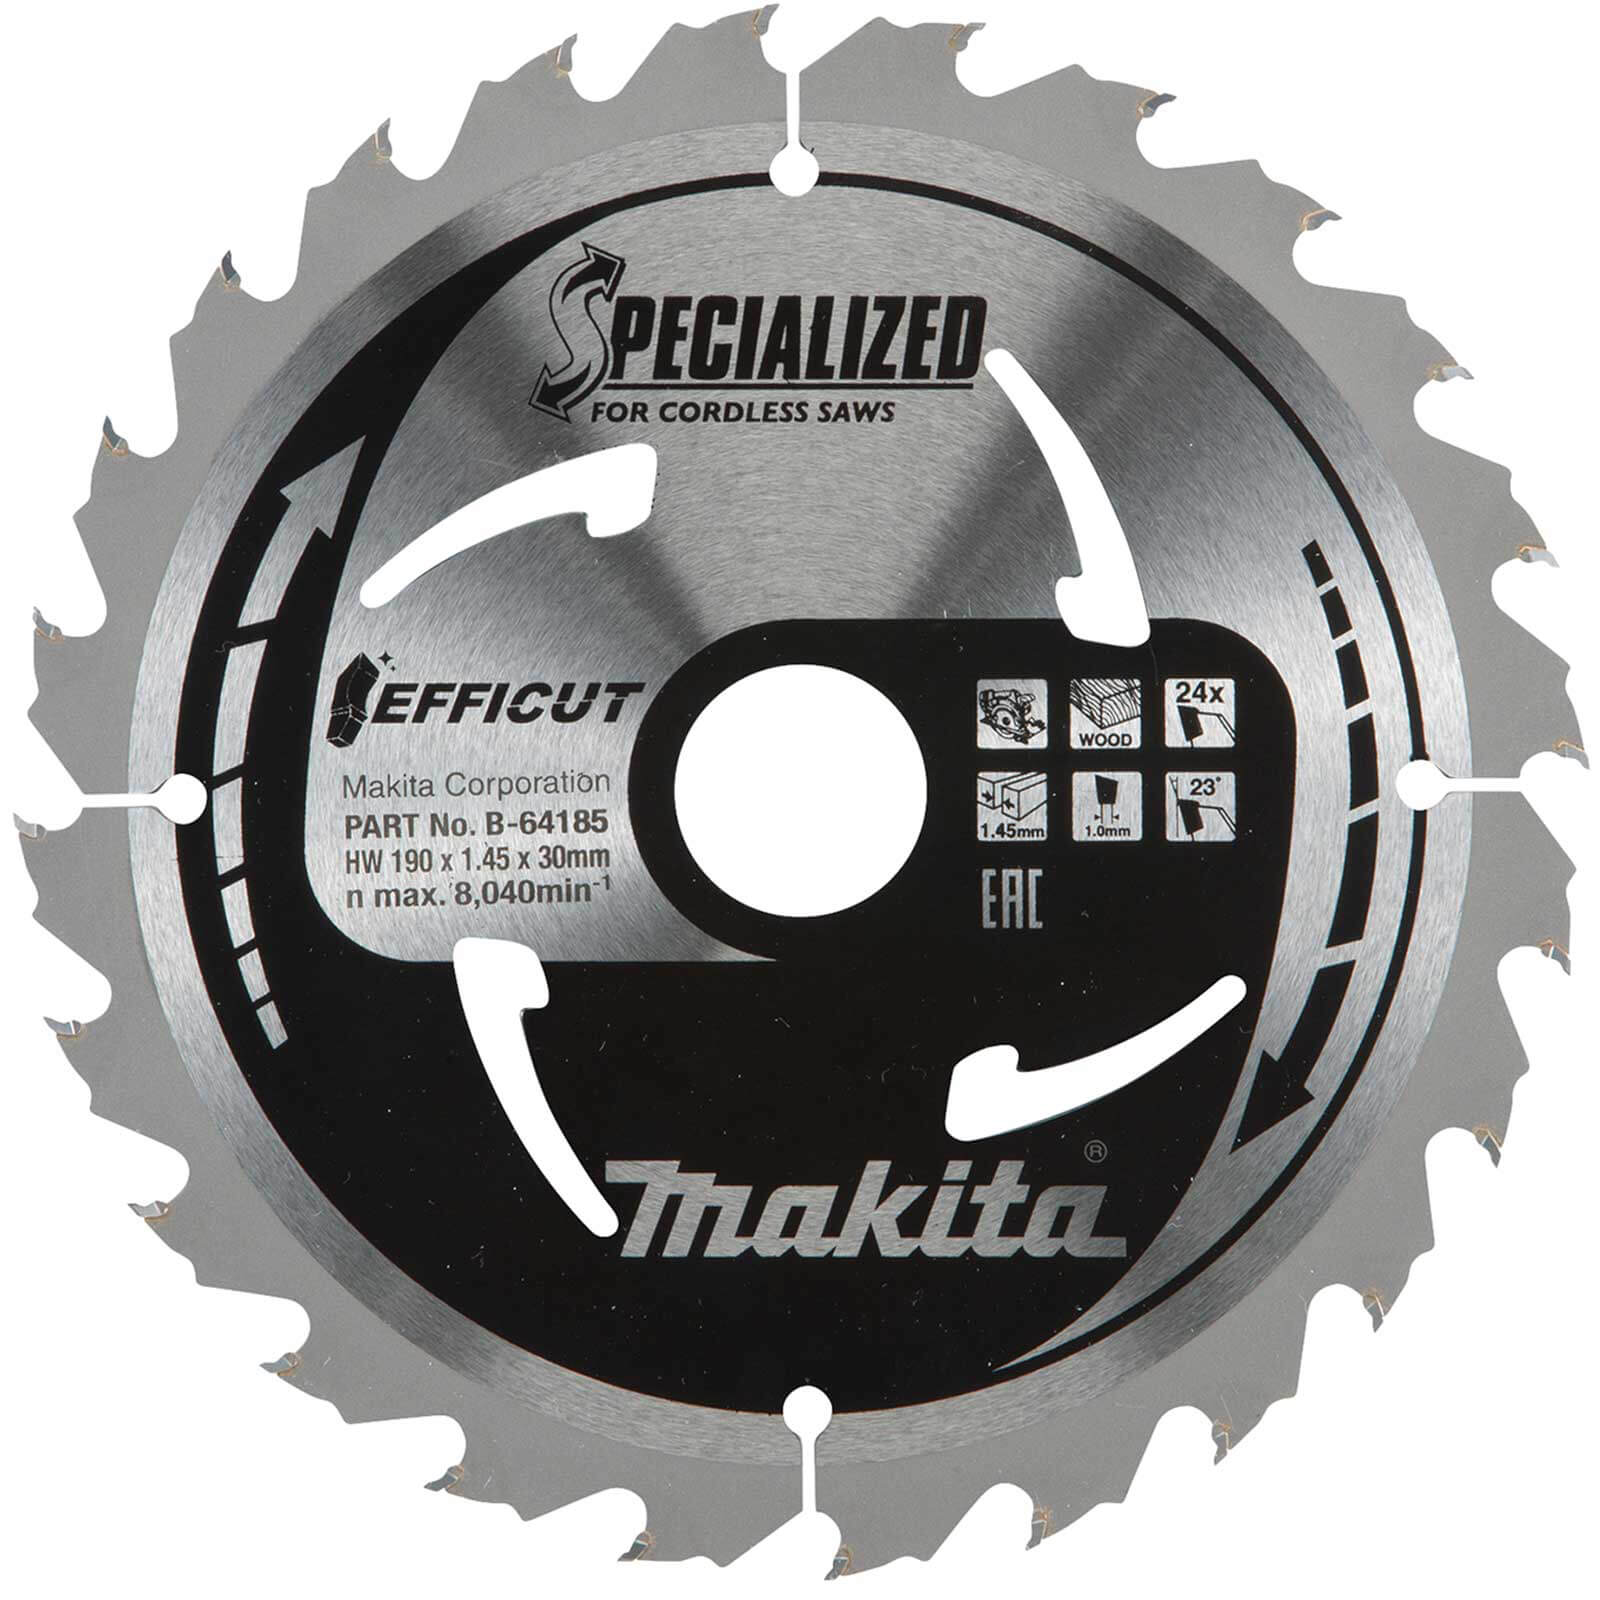 Image of Makita SPECIALIZED Efficut Wood Cutting Saw Blade 190mm 24T 30mm